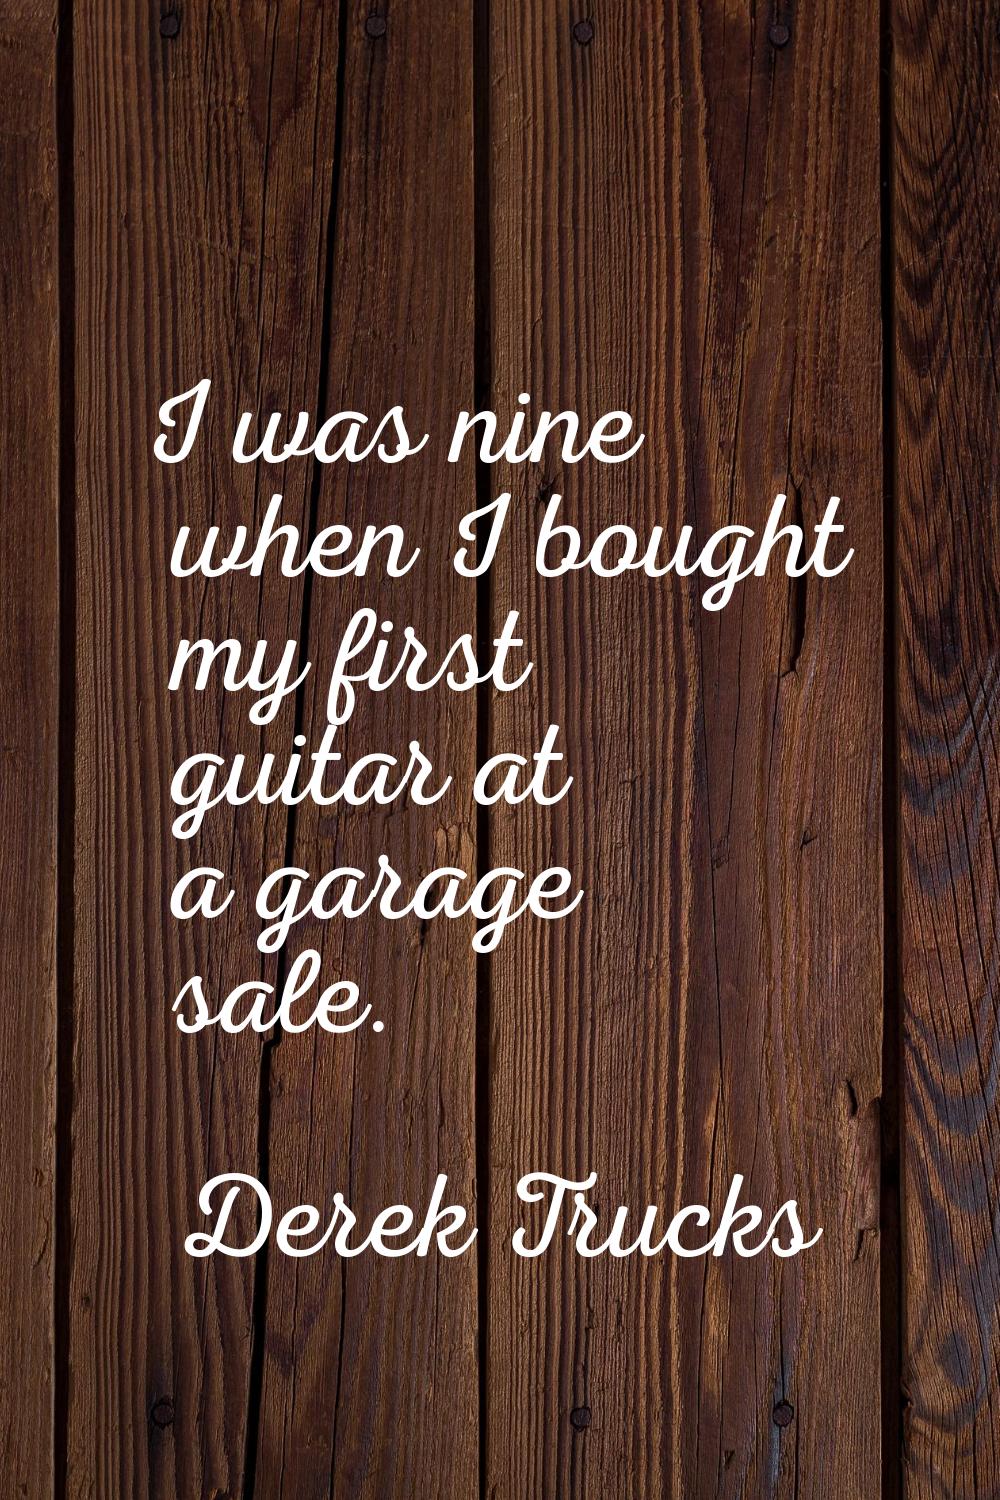 I was nine when I bought my first guitar at a garage sale.